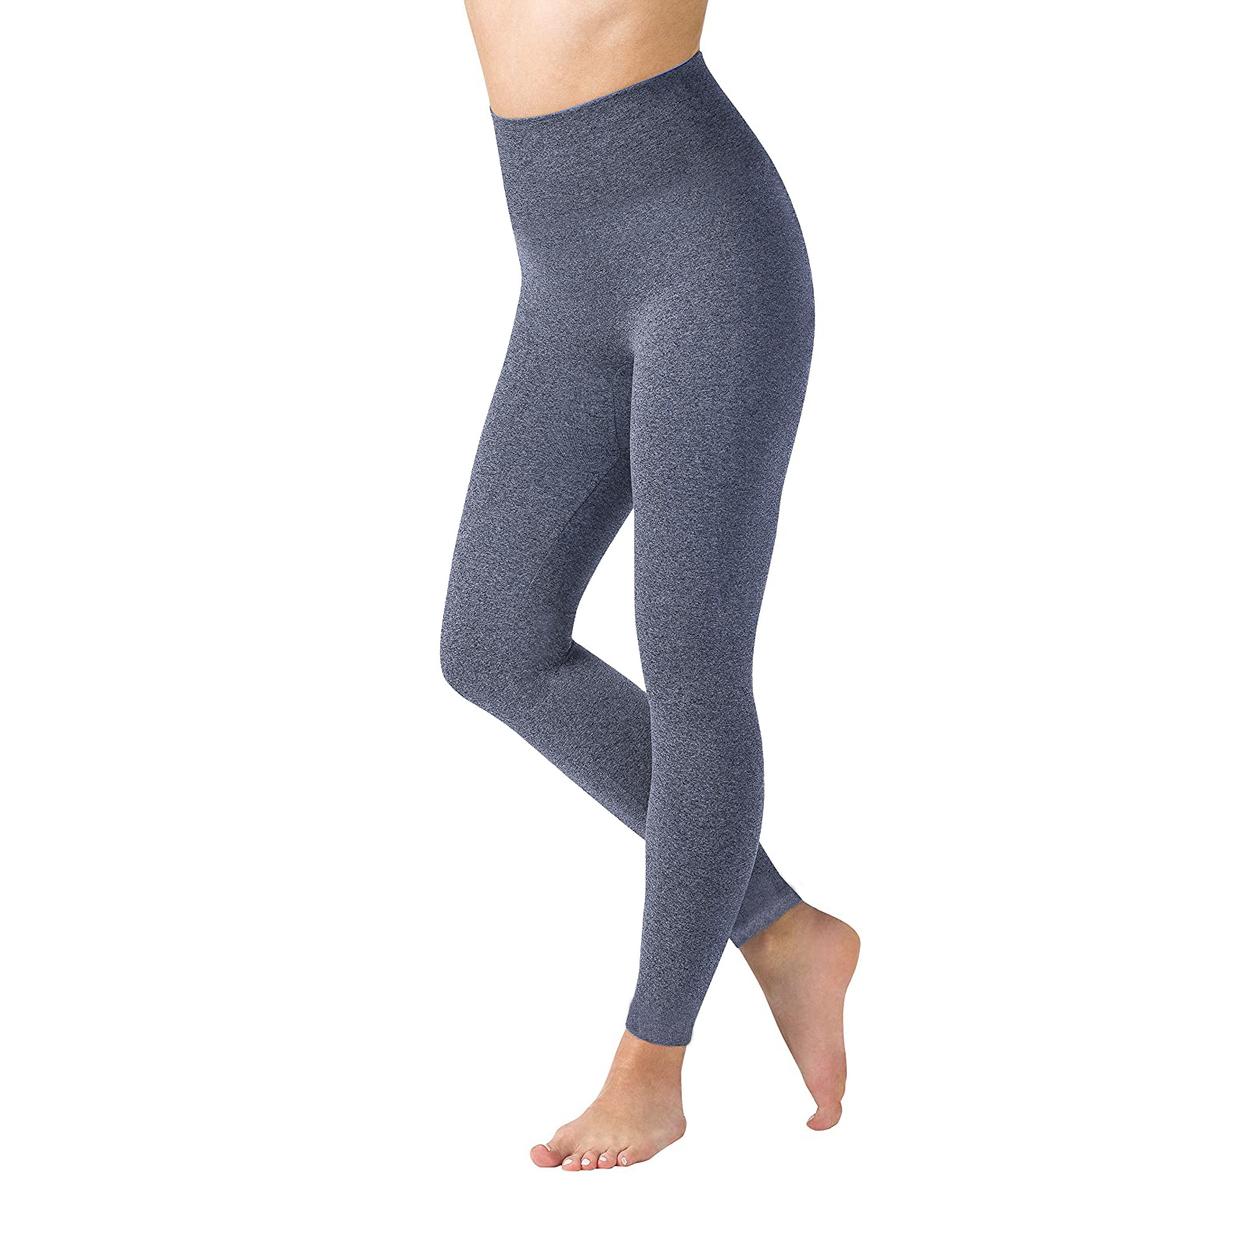 Women's High Waisted Ultra-Soft Fleece Lined Warm Marled Leggings(Available In Plus Sizes) - Navy, X-large